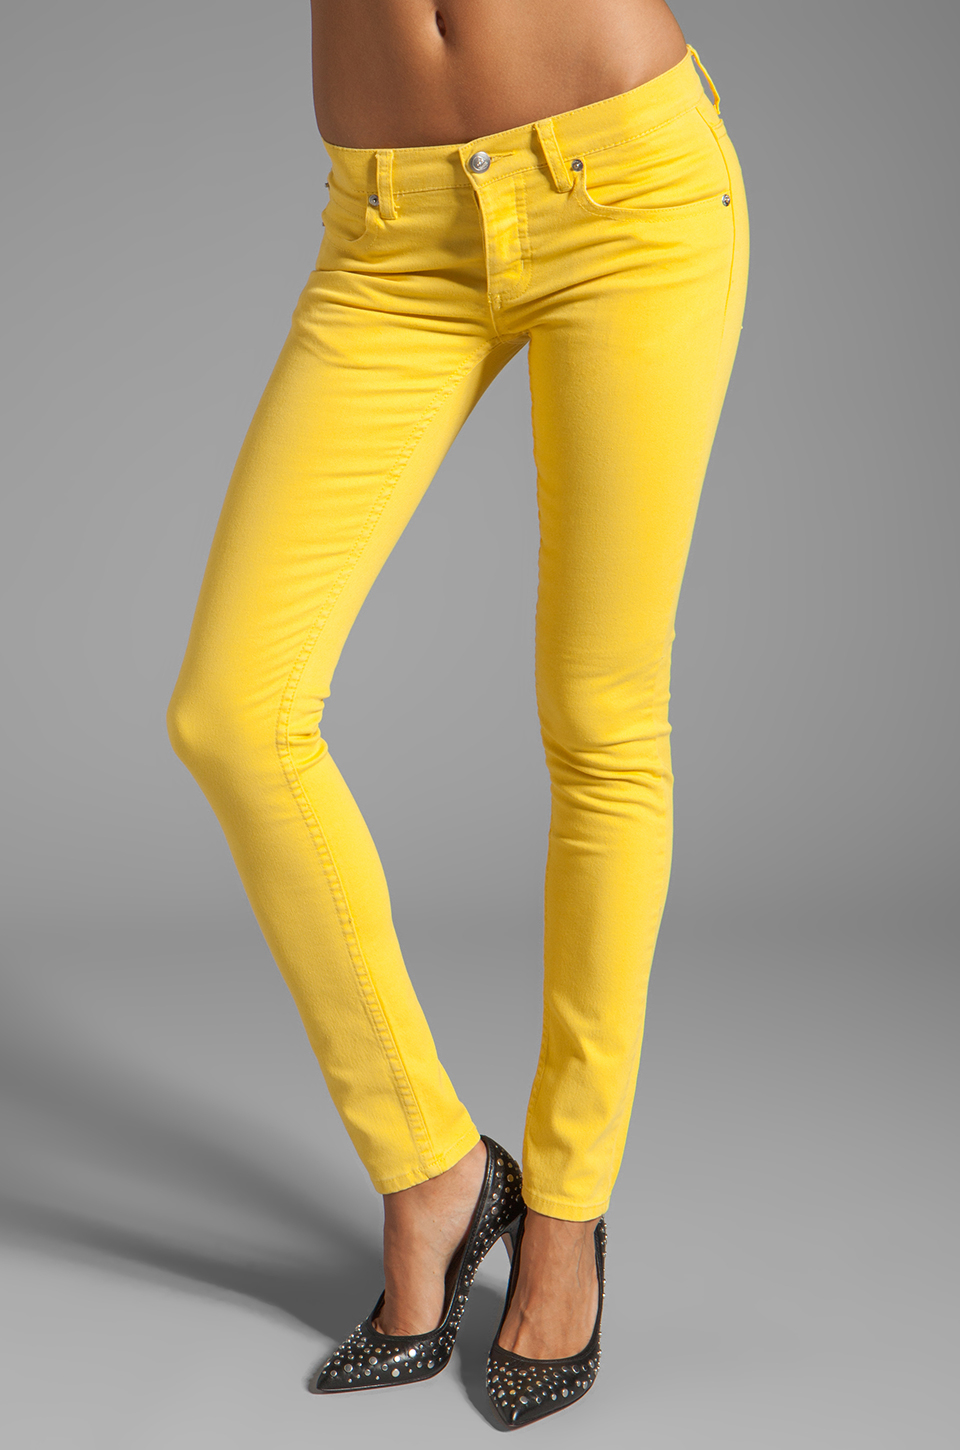 Cheap Monday Narrow Jeans in Bright Yellow - Lyst